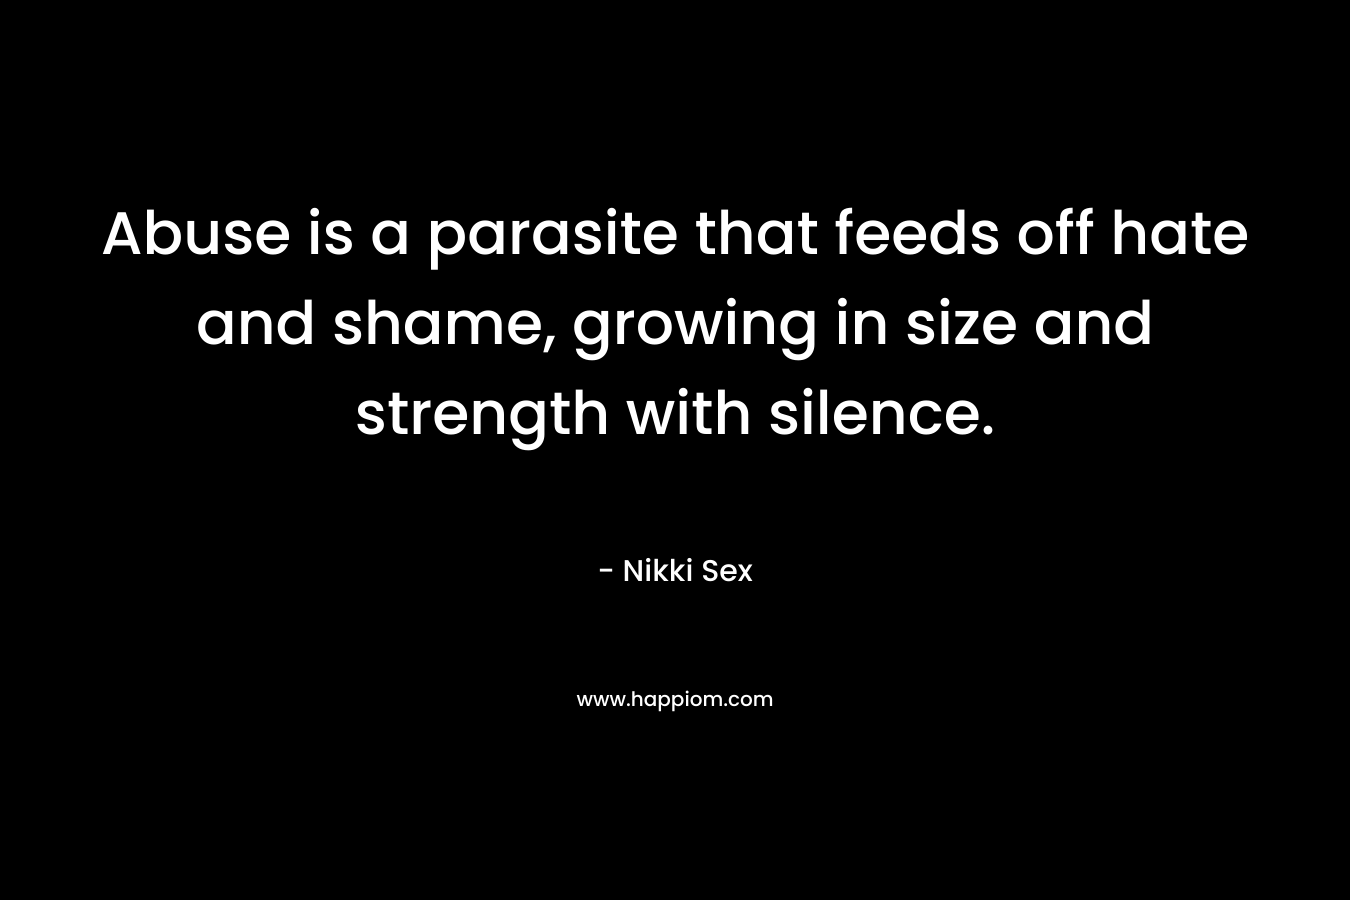 Abuse is a parasite that feeds off hate and shame, growing in size and strength with silence. – Nikki Sex